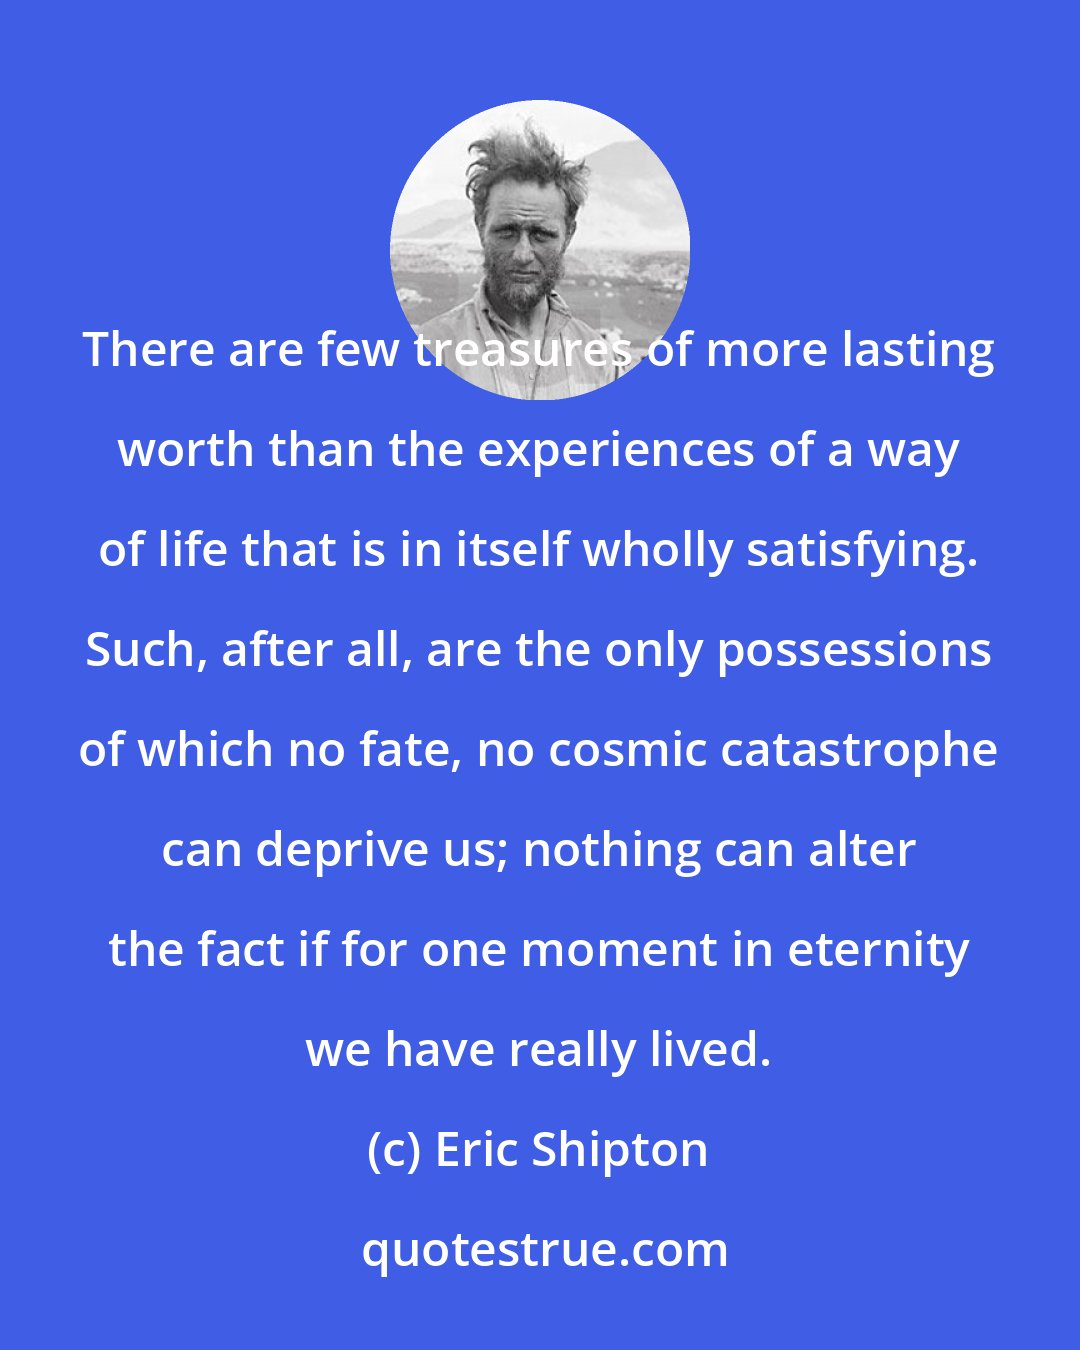 Eric Shipton: There are few treasures of more lasting worth than the experiences of a way of life that is in itself wholly satisfying. Such, after all, are the only possessions of which no fate, no cosmic catastrophe can deprive us; nothing can alter the fact if for one moment in eternity we have really lived.